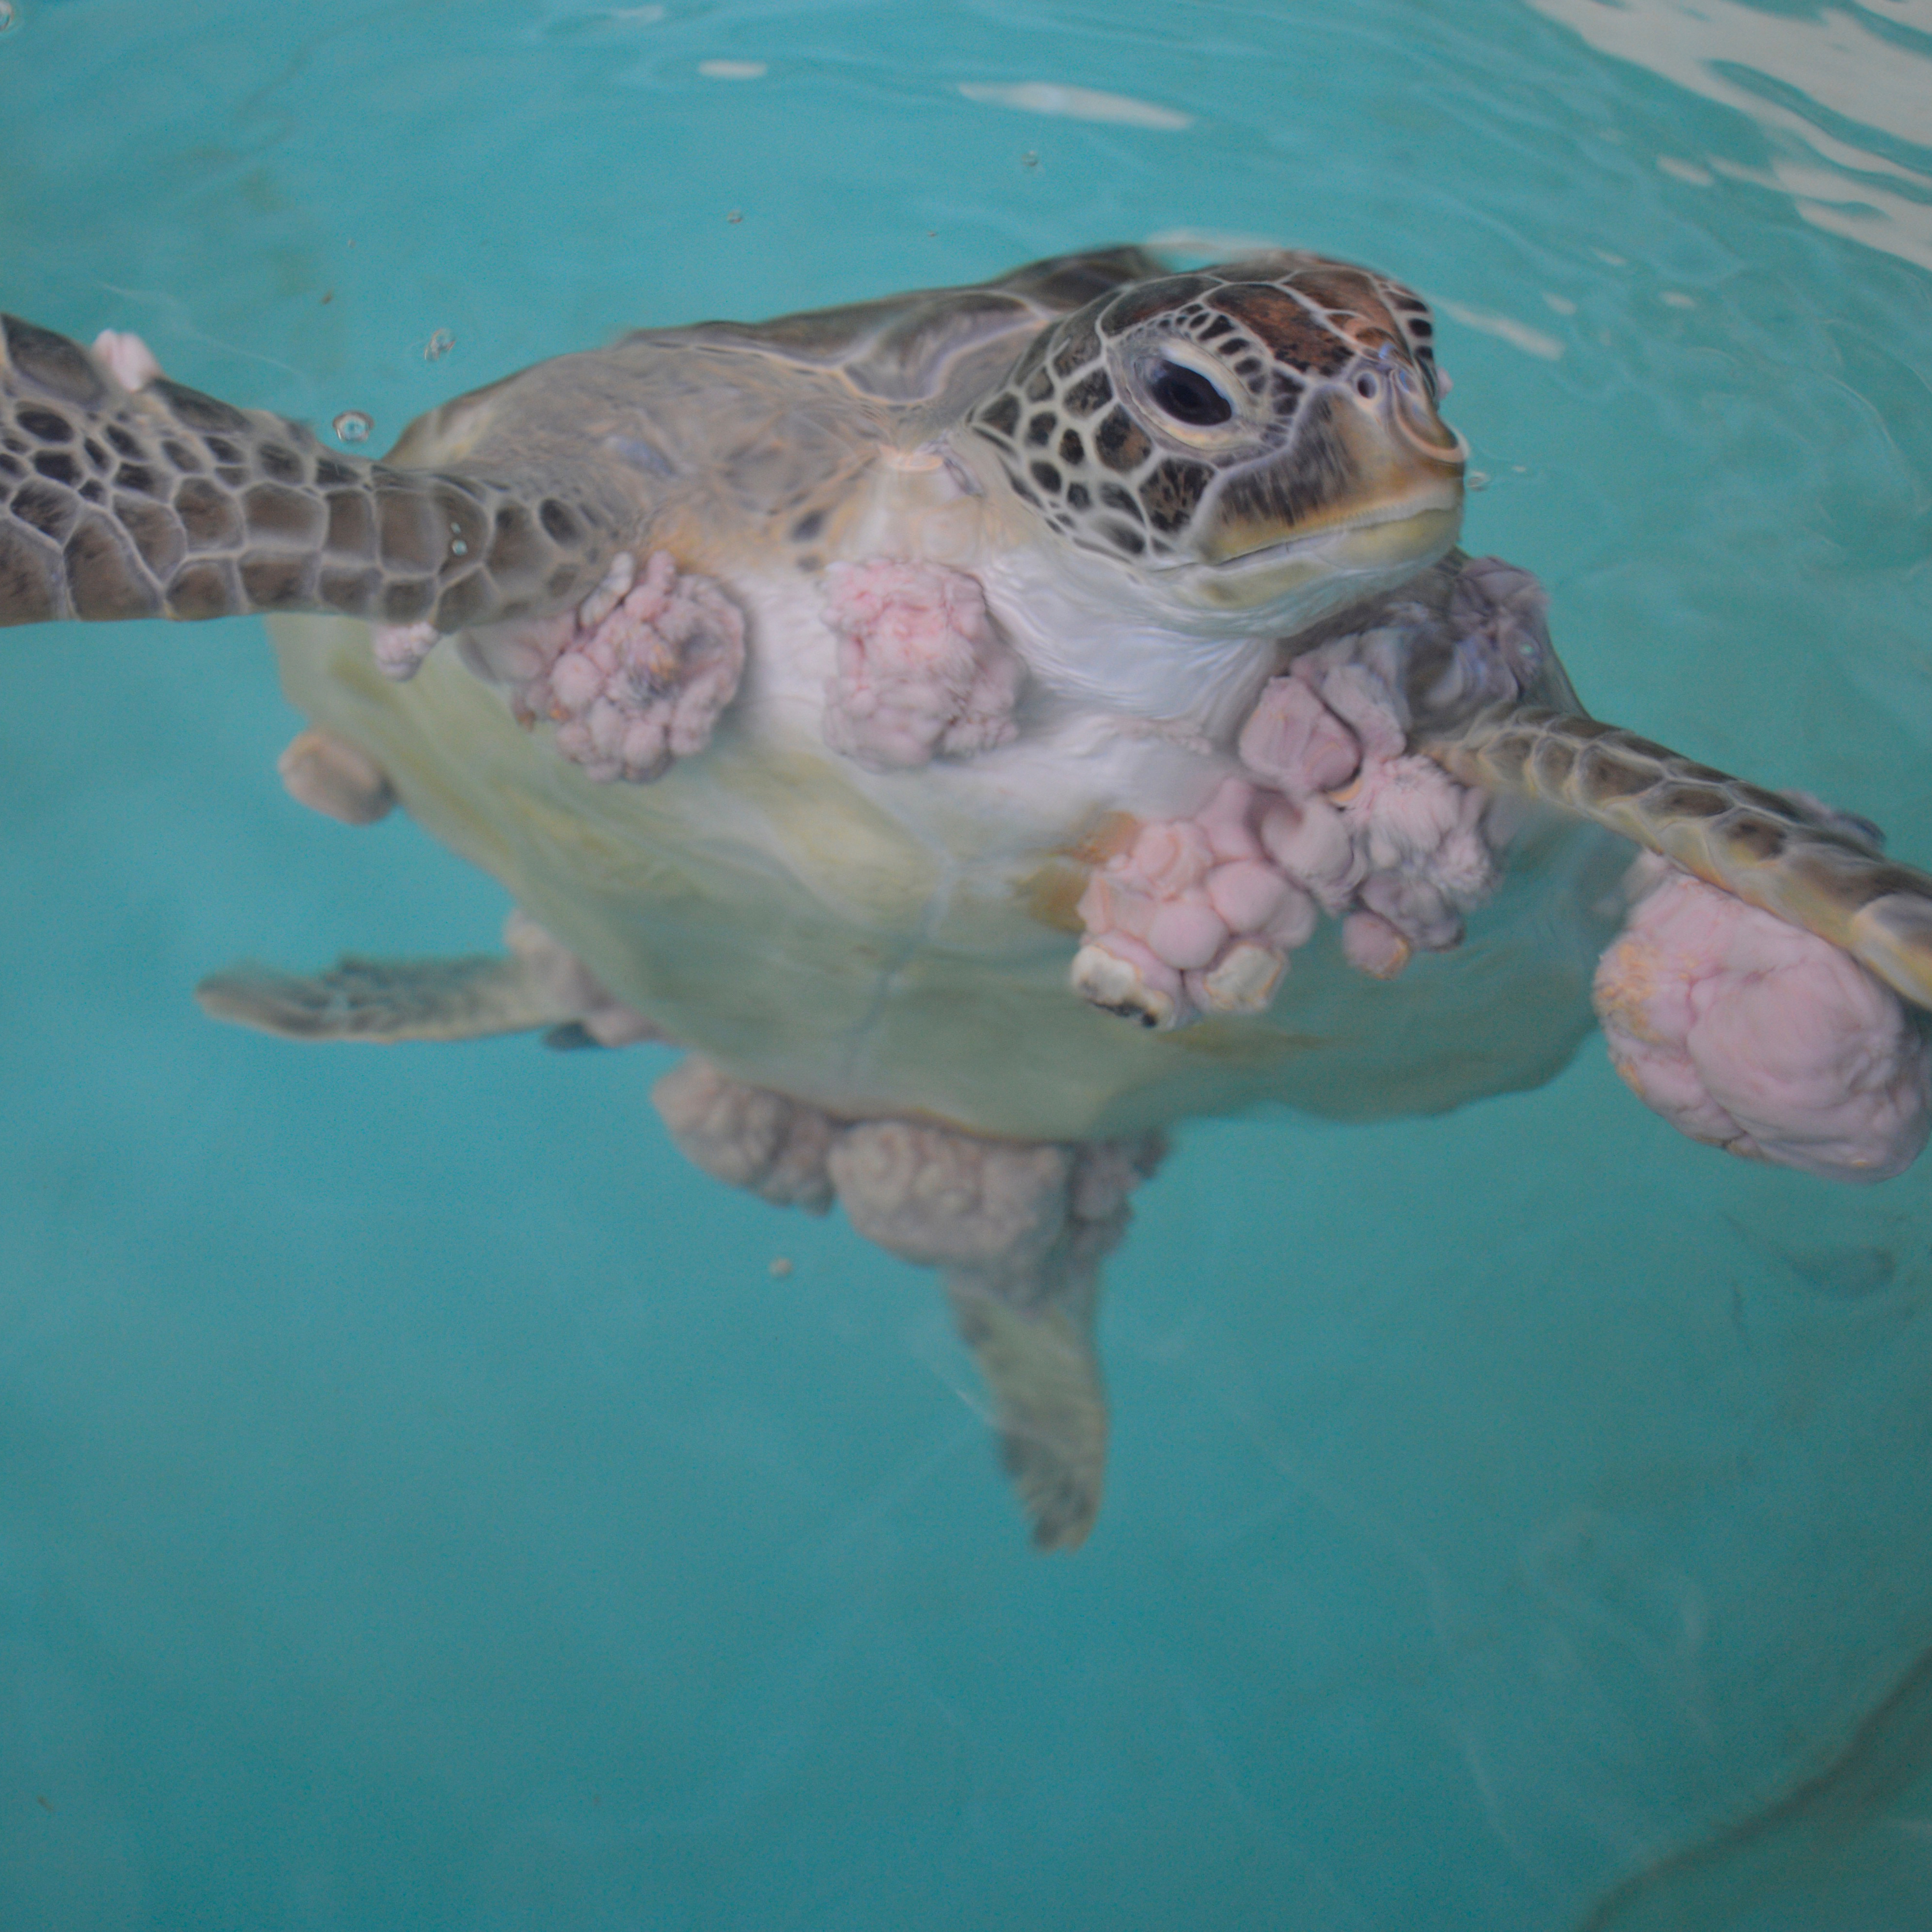 Recent Publication in Communications Biology Shares Sea Turtle Research by Dr. David Duffy and Dr. Mark Martindale 